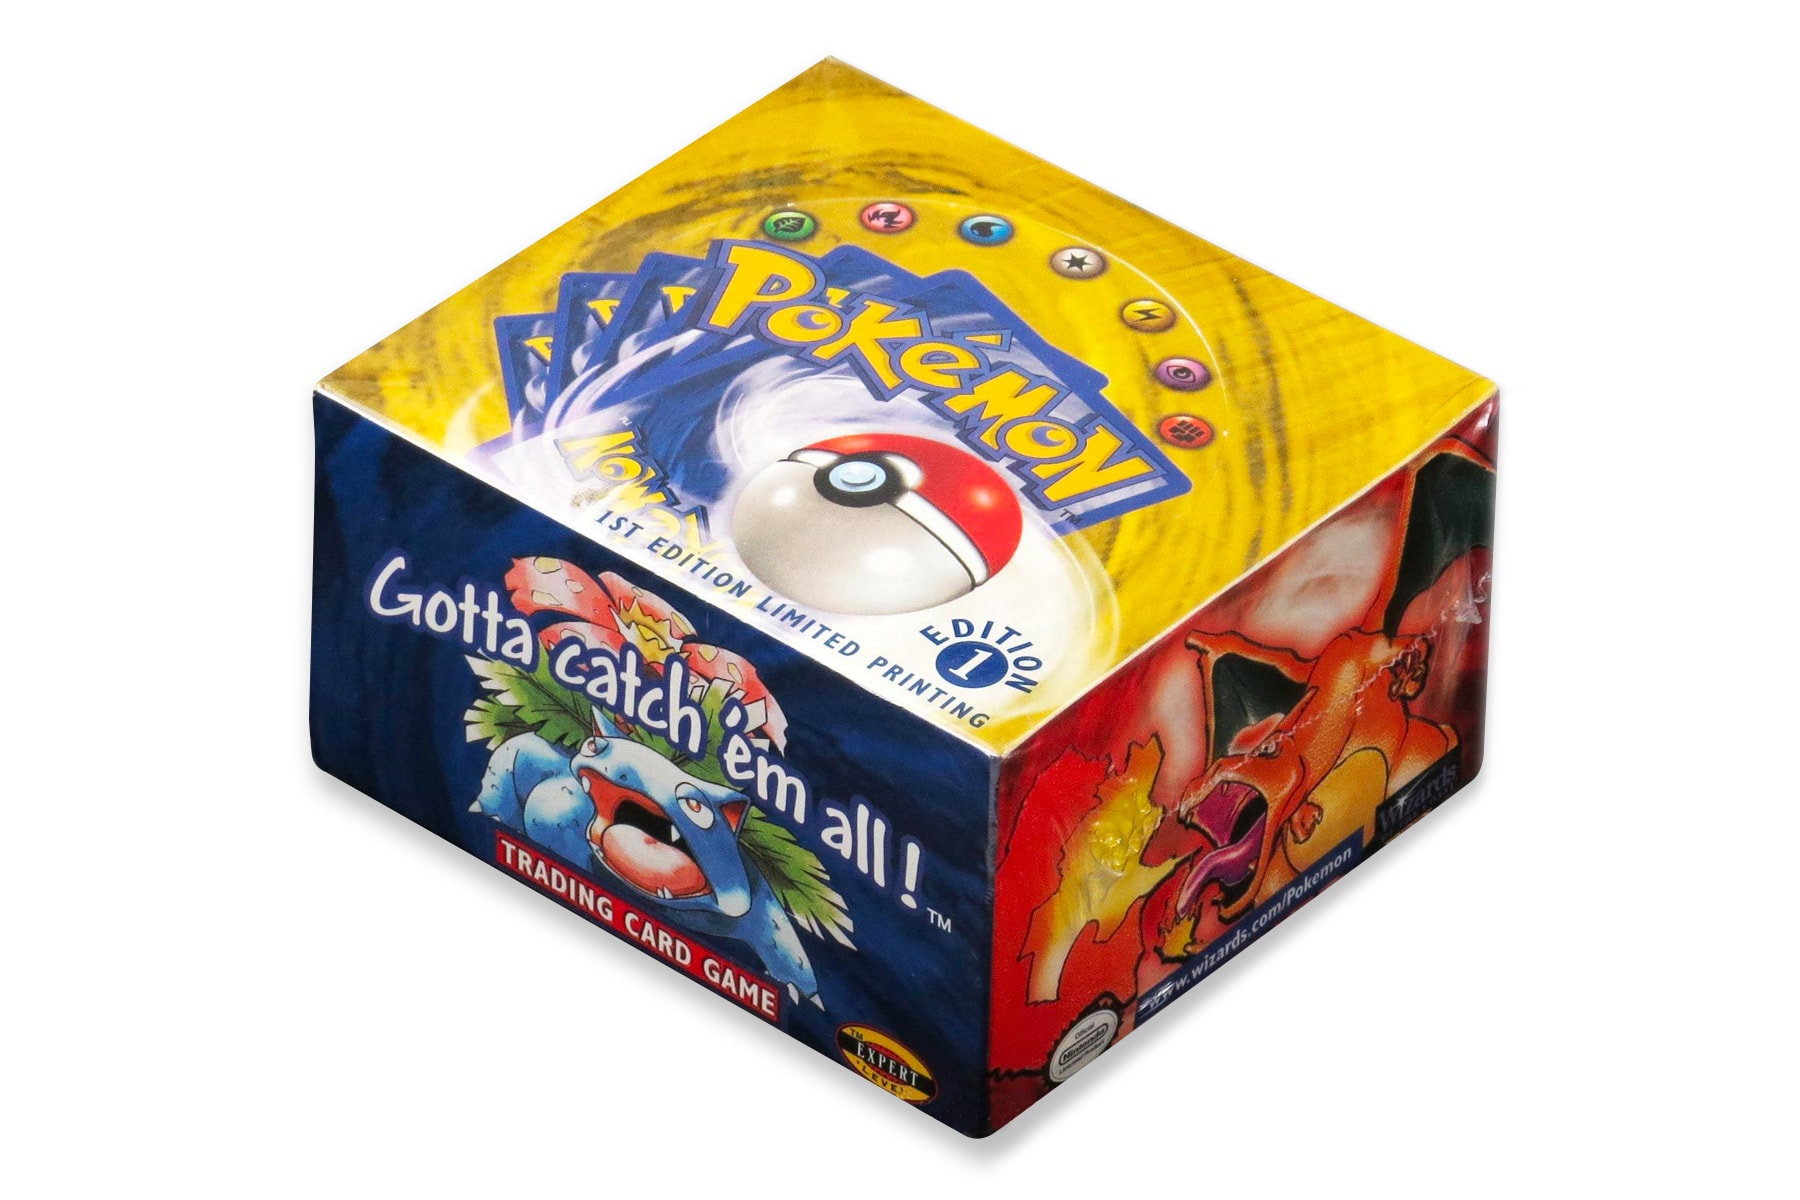 Unopened 1999 1st Edition Limited Printing Pokémon TCG Booster Box on  Auction - Interest - Anime News Network